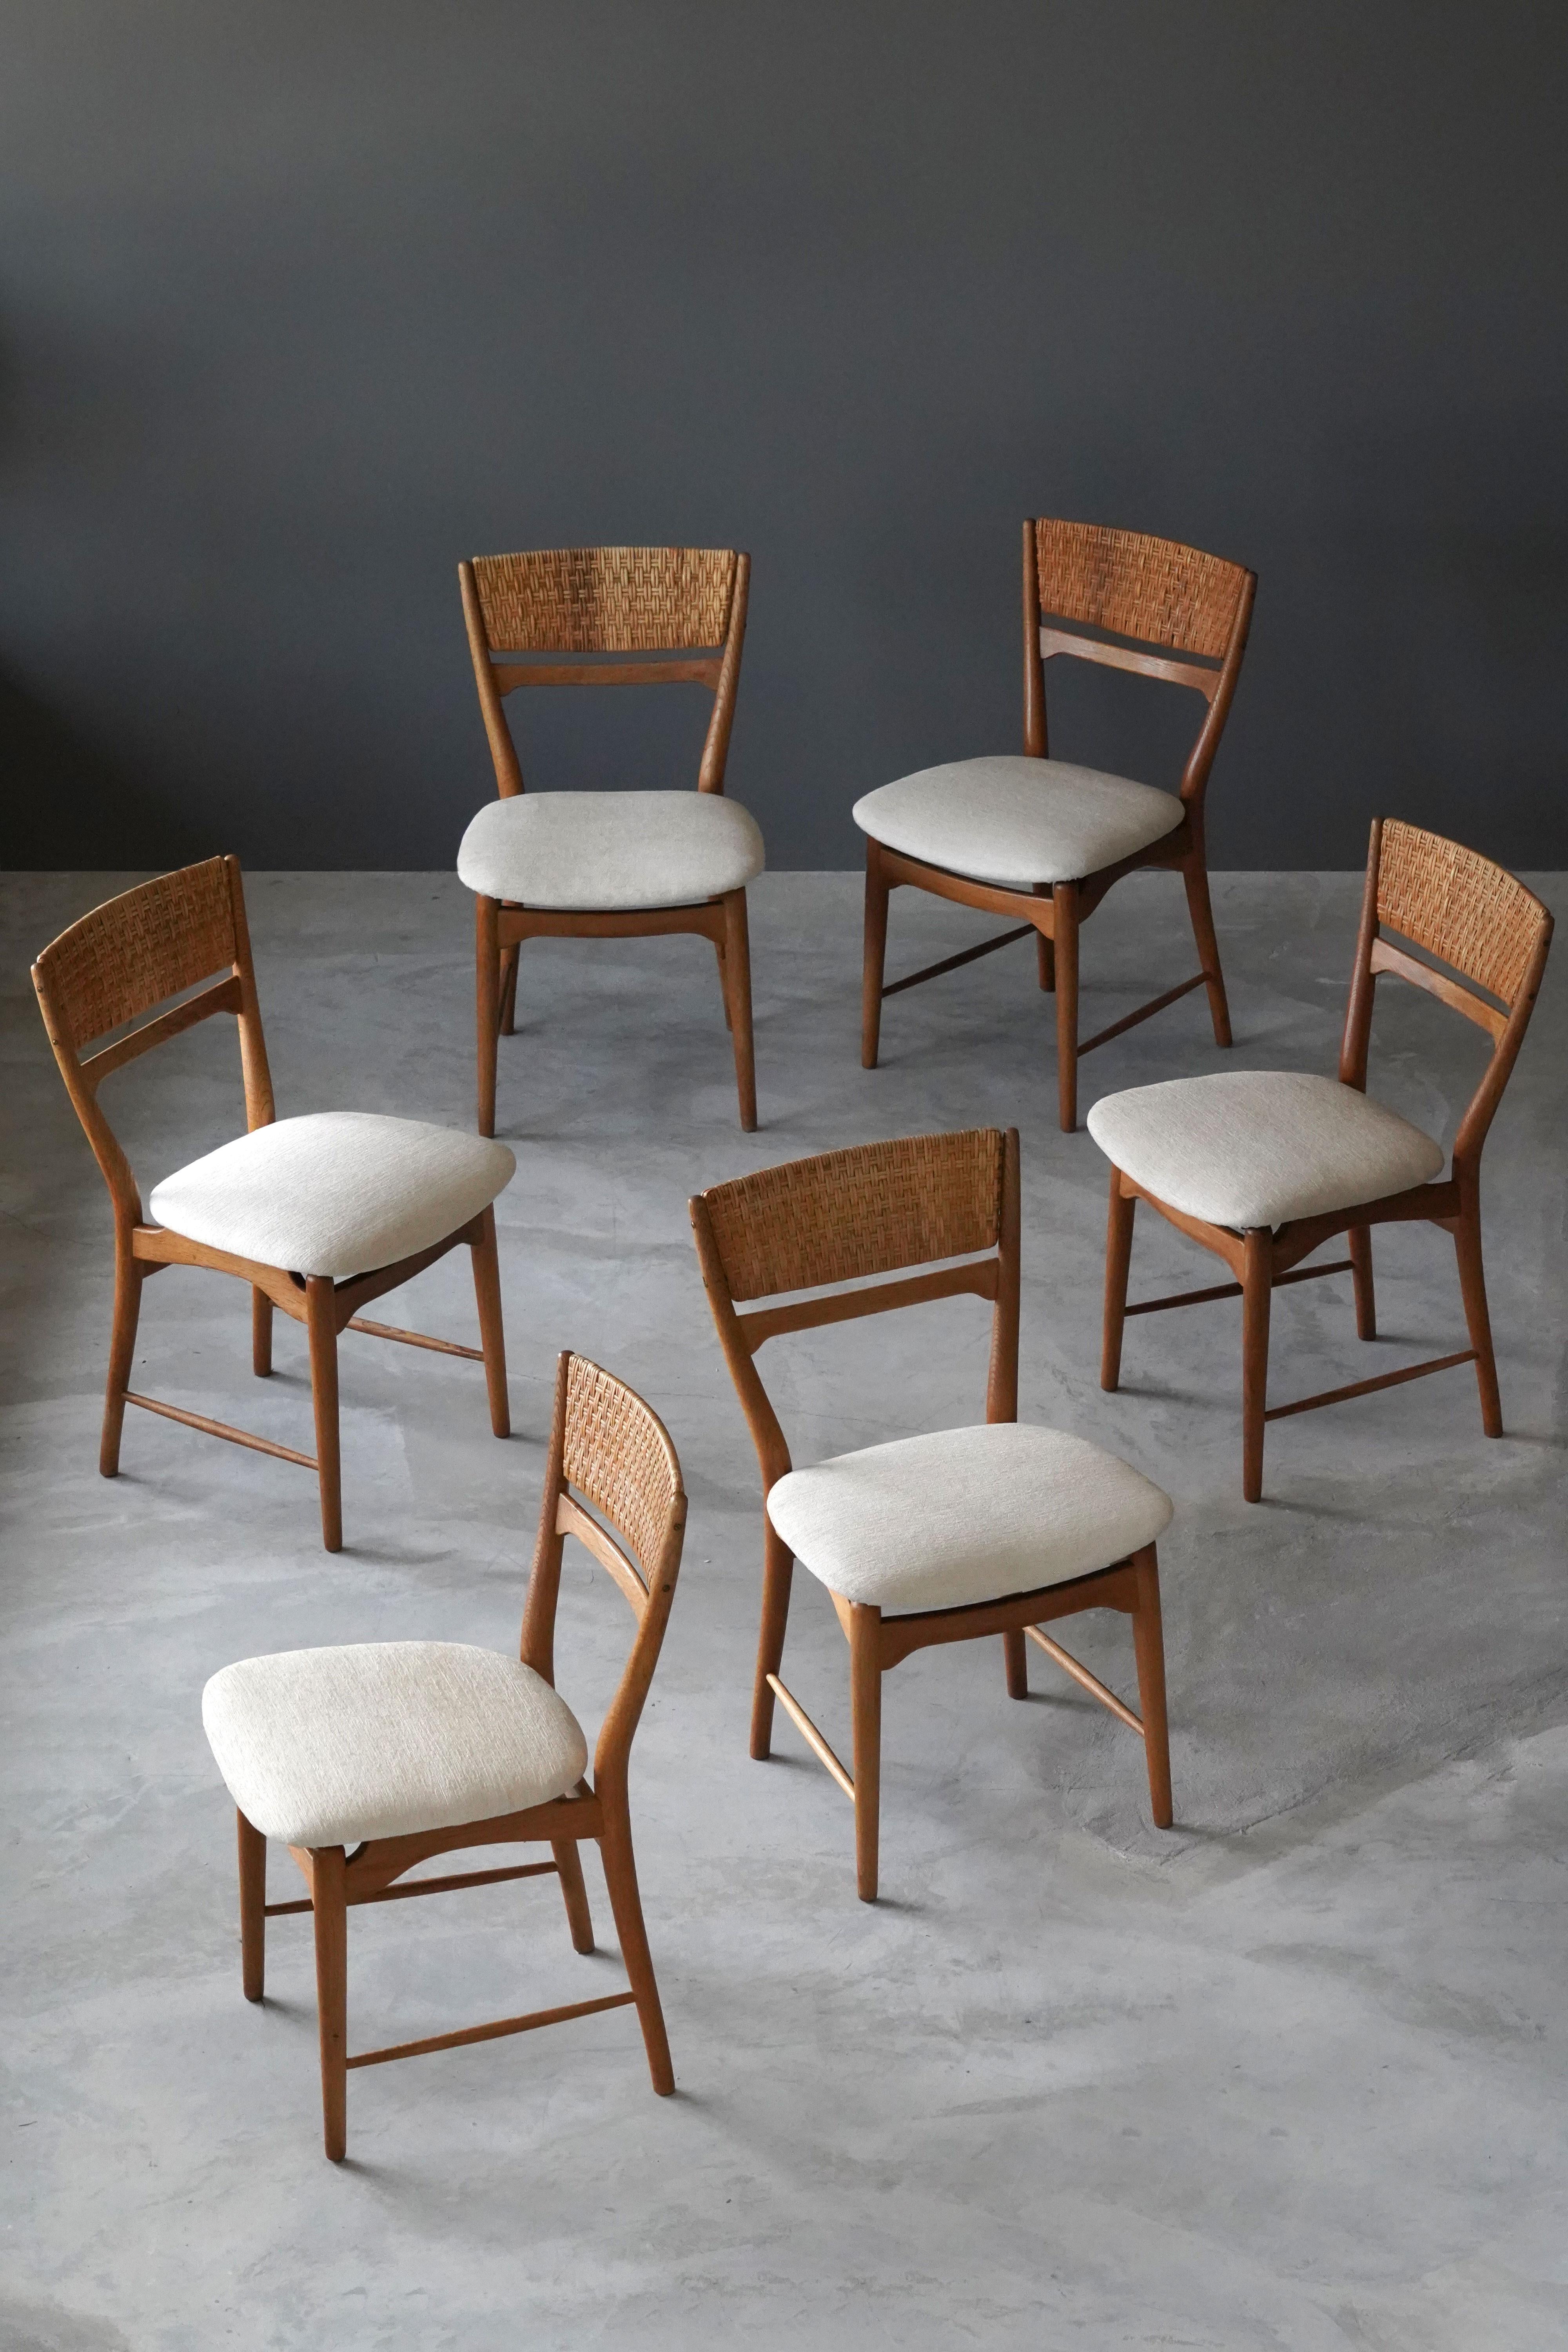 A dining group consisting of six dining chairs model 271 T, designed by Danish designer Arne Wahl Iversen in 1957. Produced by Sorø Stolefabrik, Denmark. Sculpted oak is paired with woven cane backs and overstuffed fabric seats.

Other designers